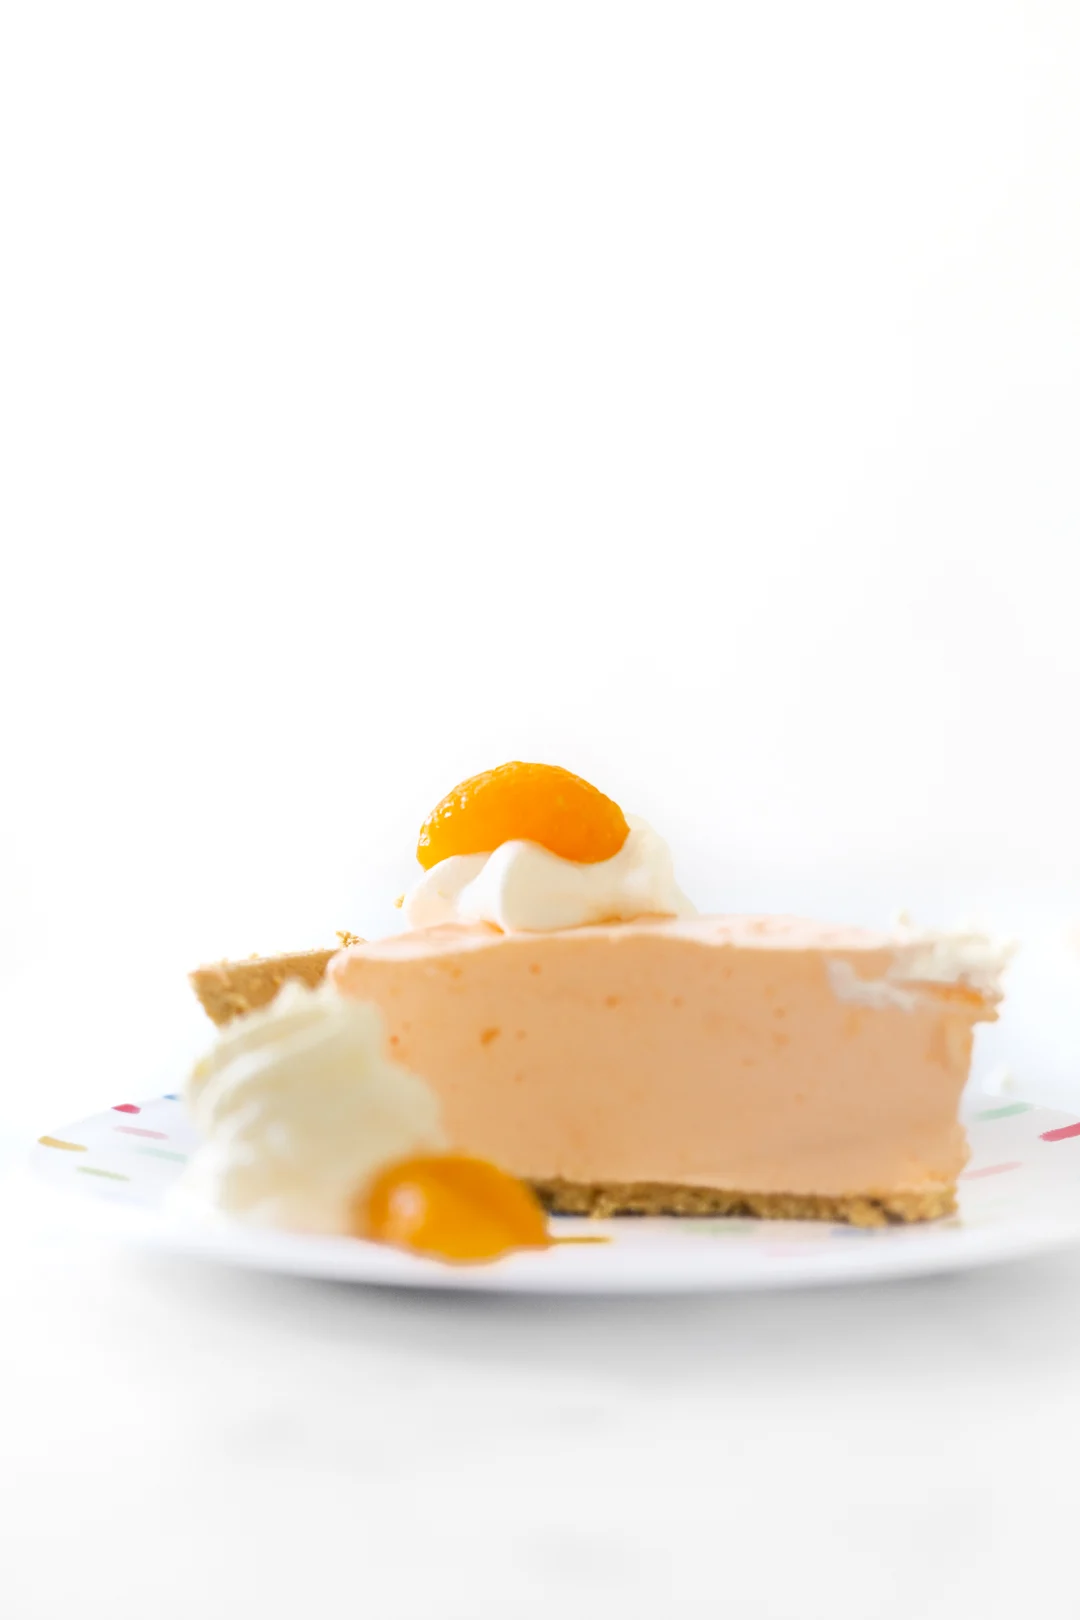 slice of pretty orange pie and topped with fruit garnish